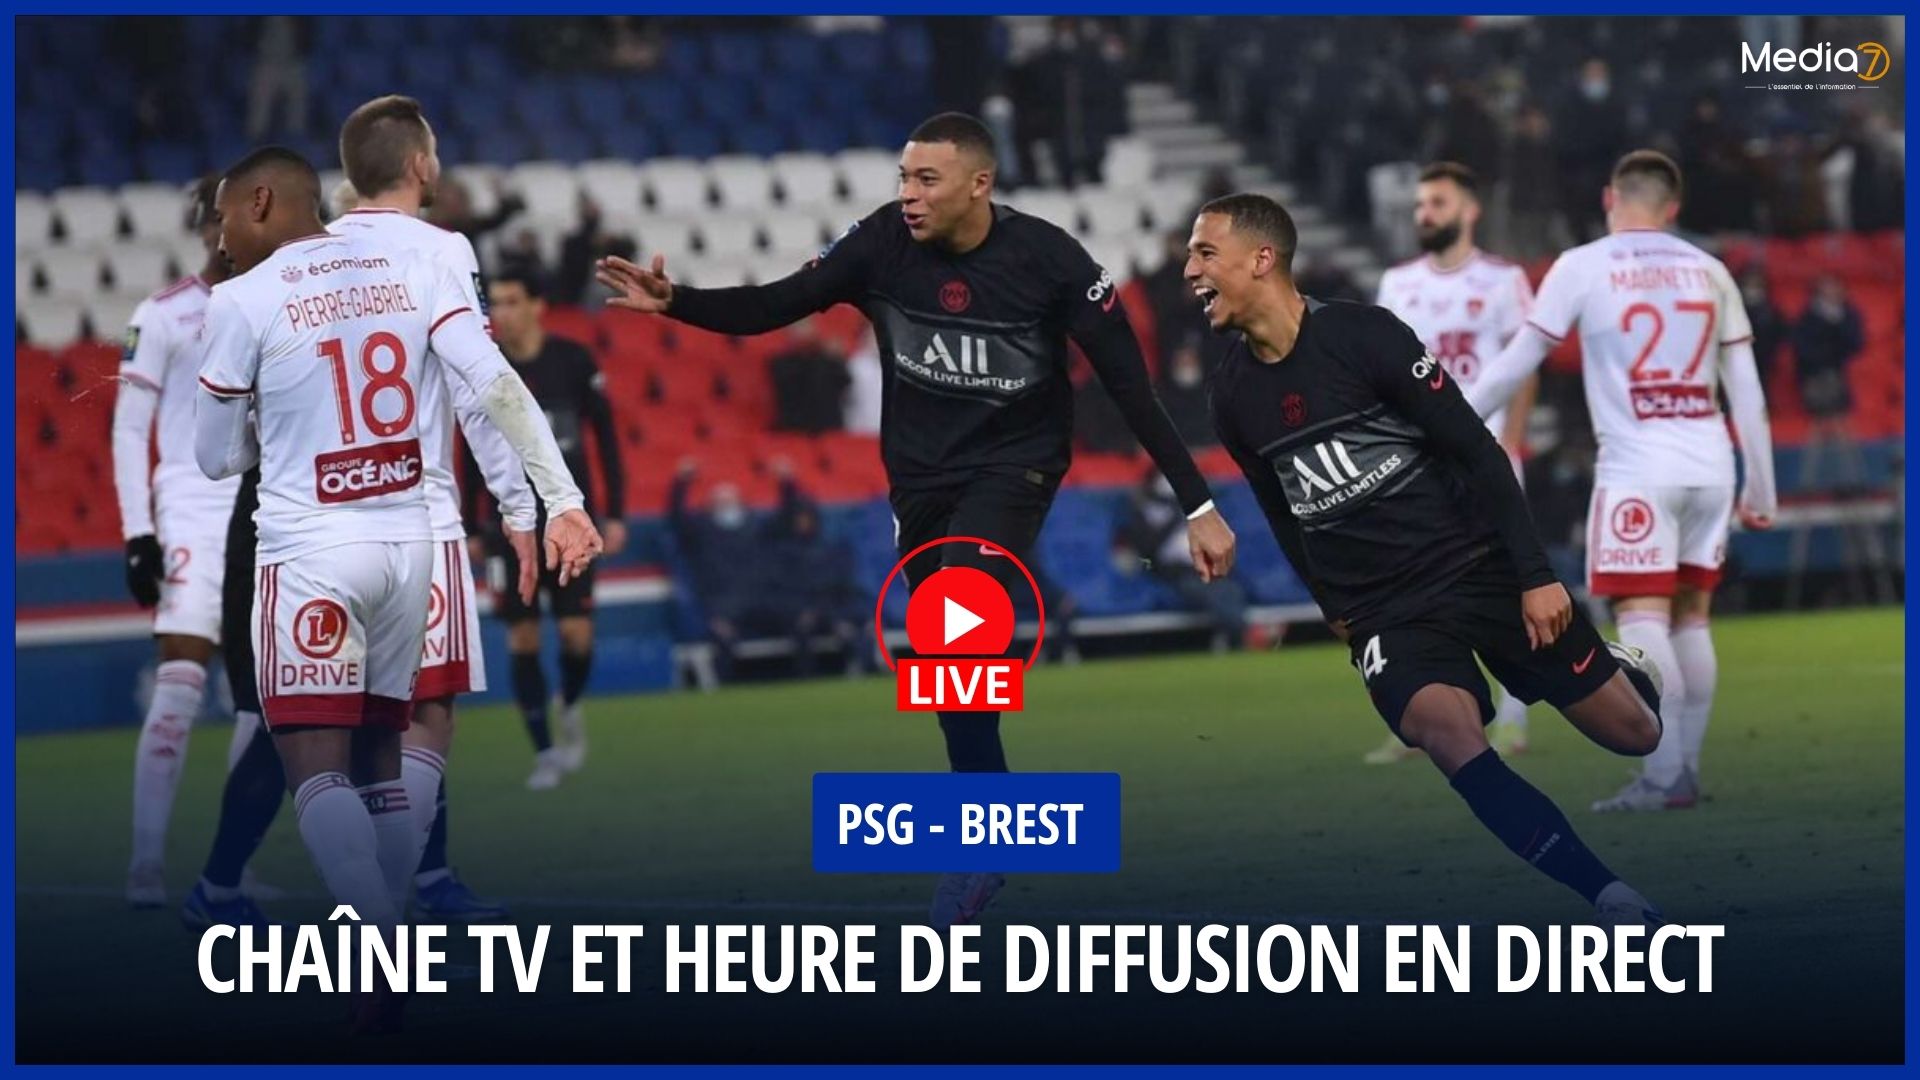 PSG - Brest Live: TV Channel and Broadcast Schedule - Media7